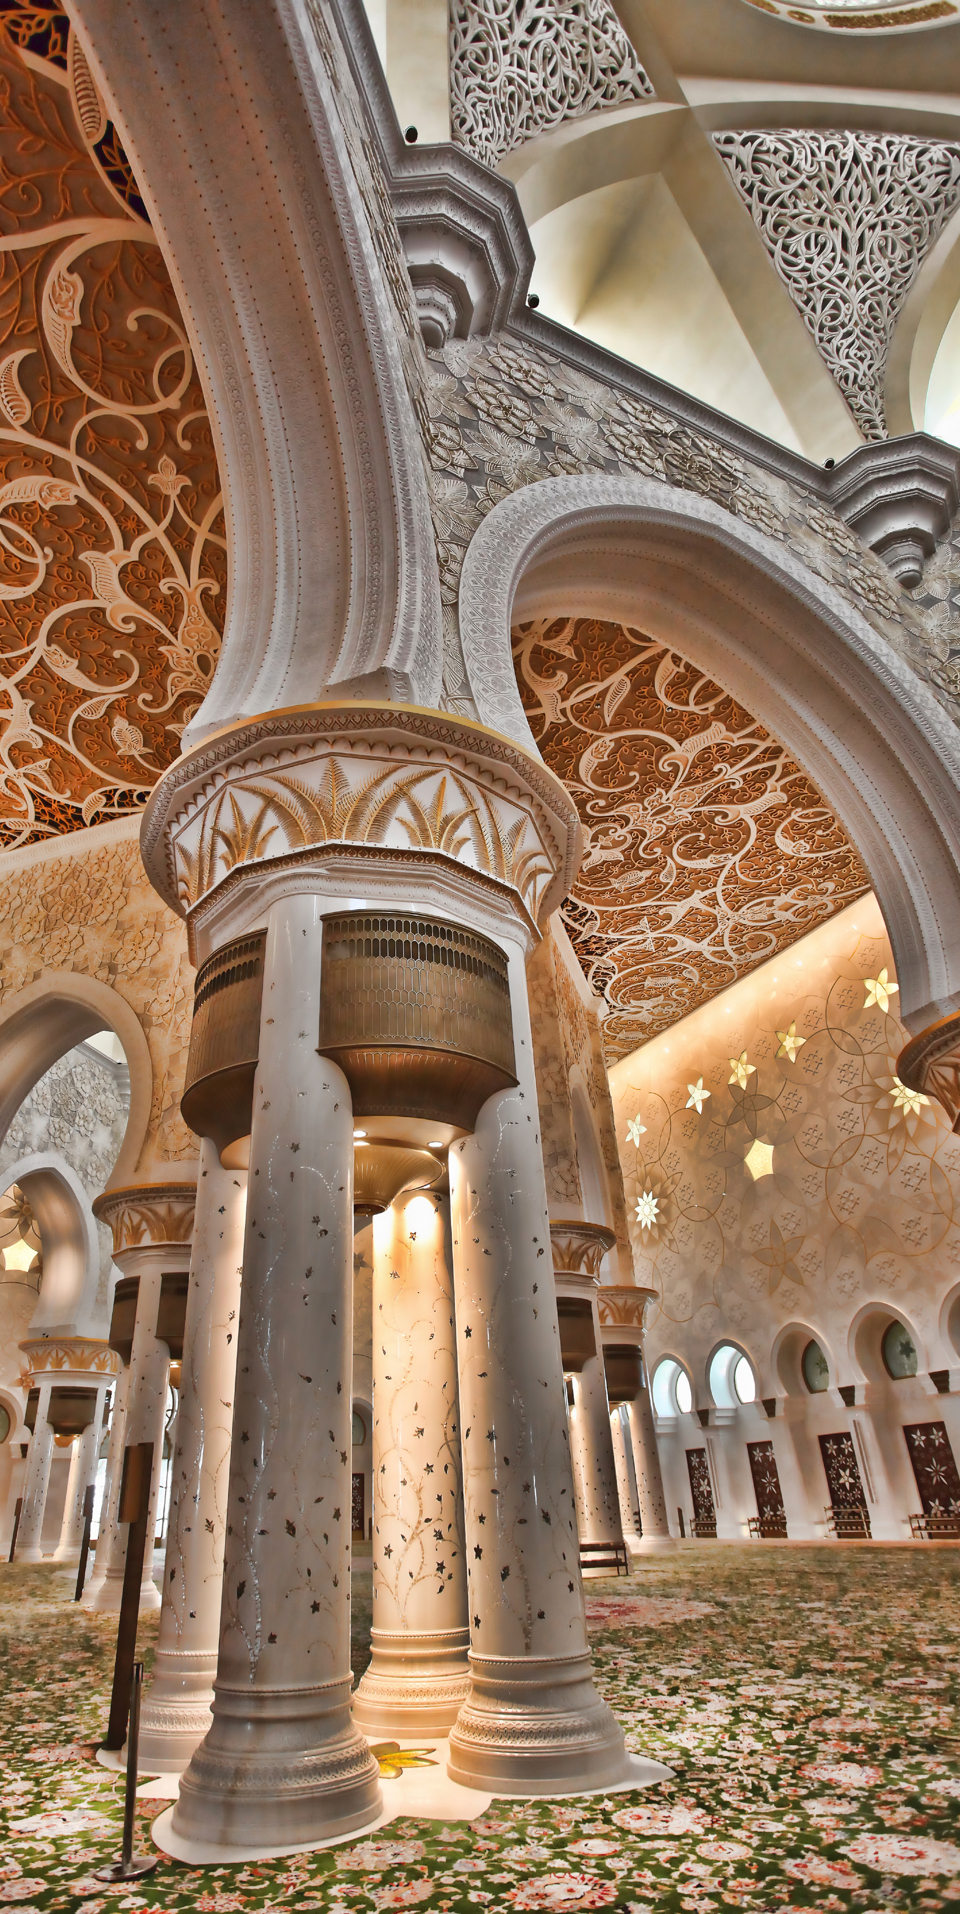 Sheik Zayed Grand Mosque, 1,000 pillars created from 100,000 tons...